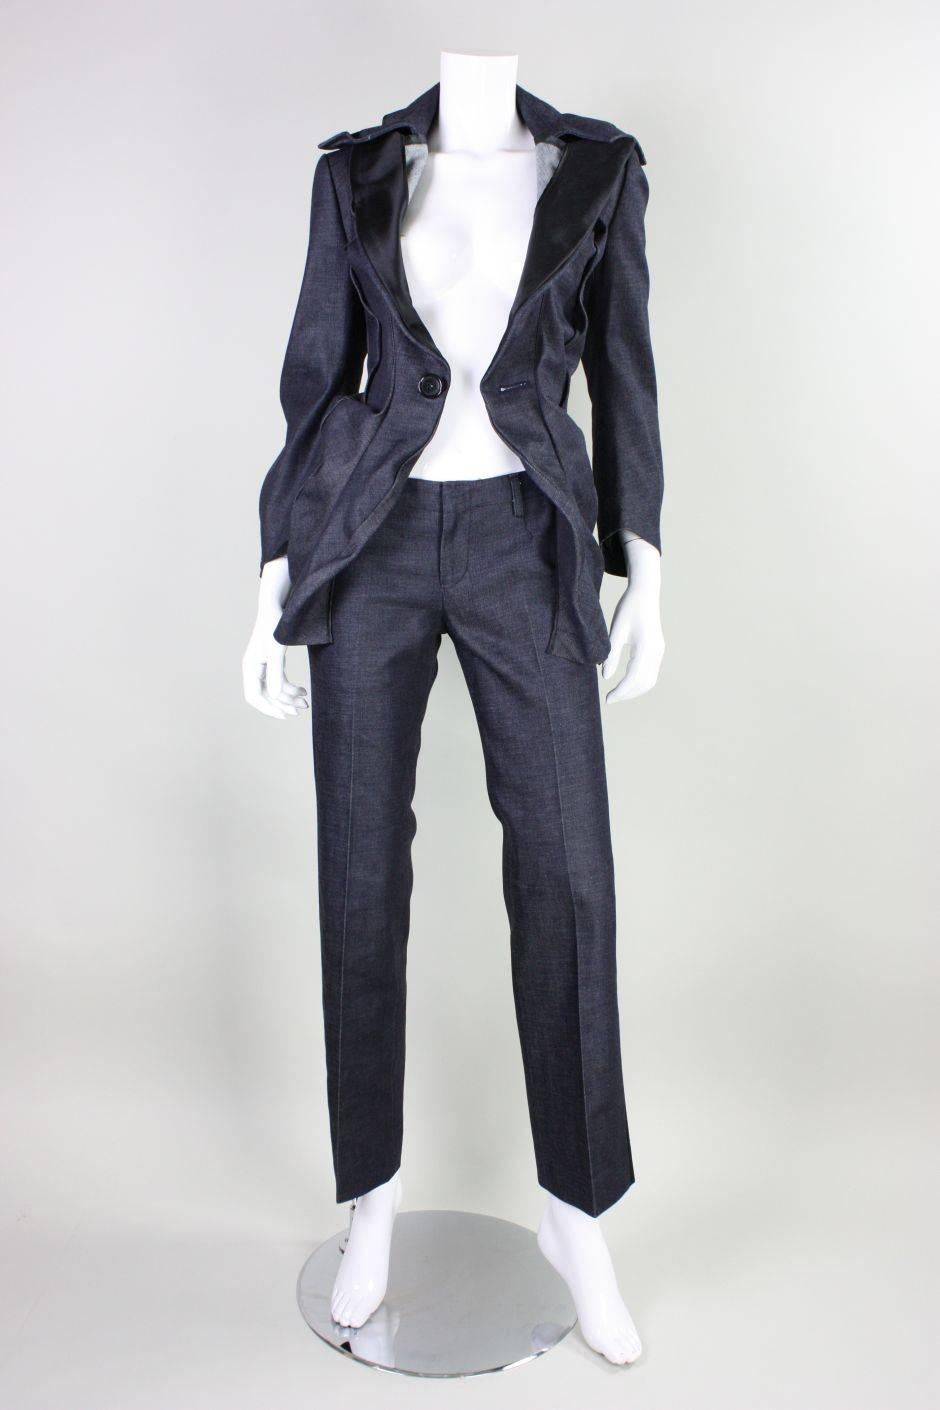 2006 Junya Watanabe for Comme des Garcons Denim Ensemble In Excellent Condition For Sale In Los Angeles, CA